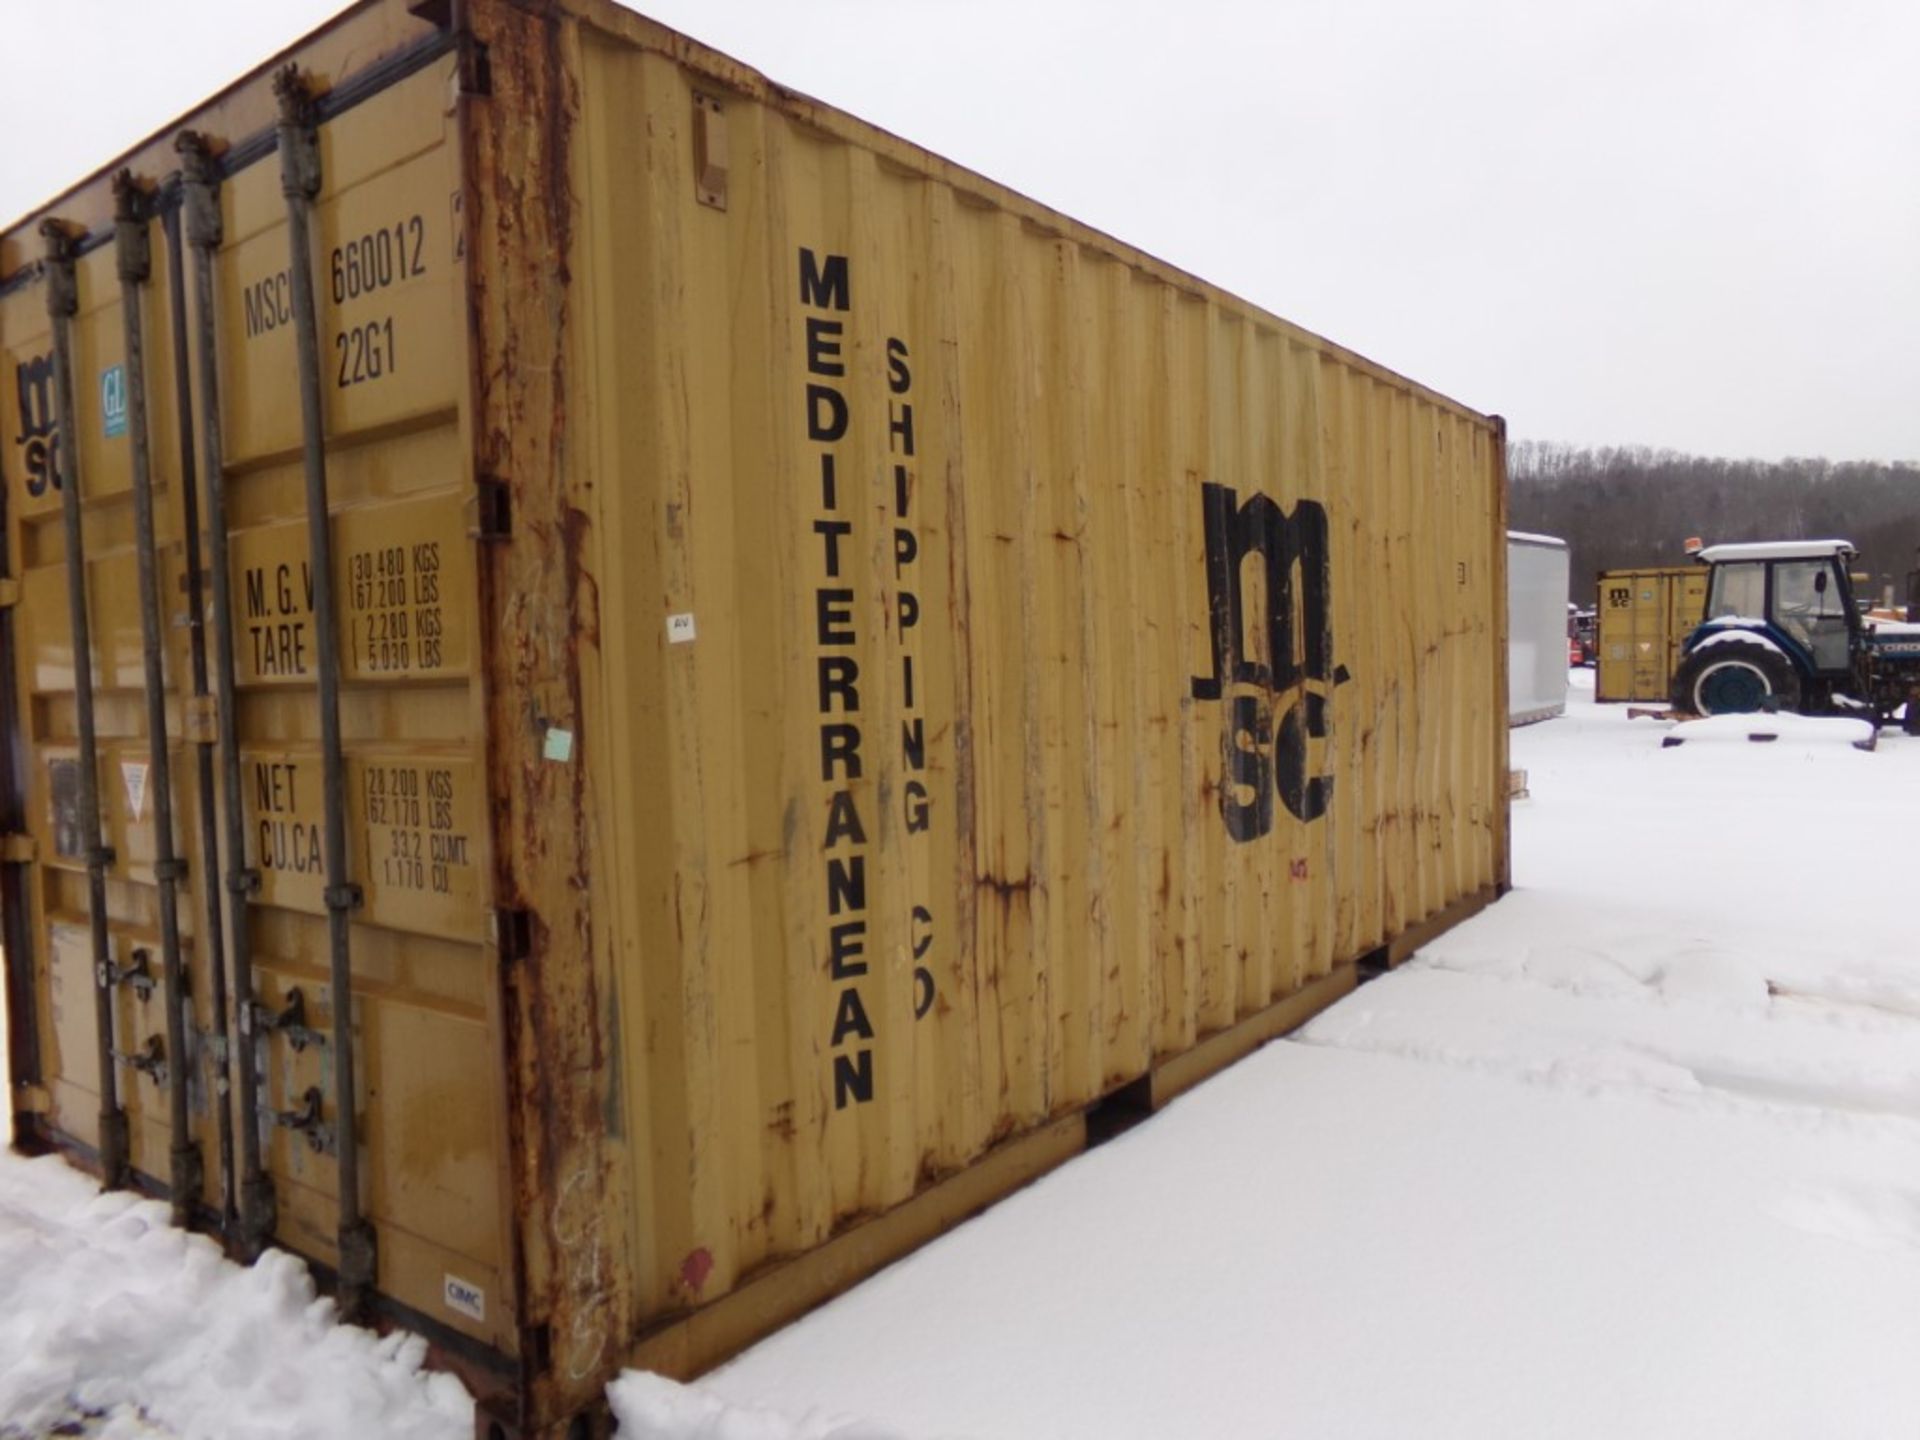 Yellow, 20' Shipping/Storage Container, Barn Doors On End, # WSCV6600122 - Image 2 of 2